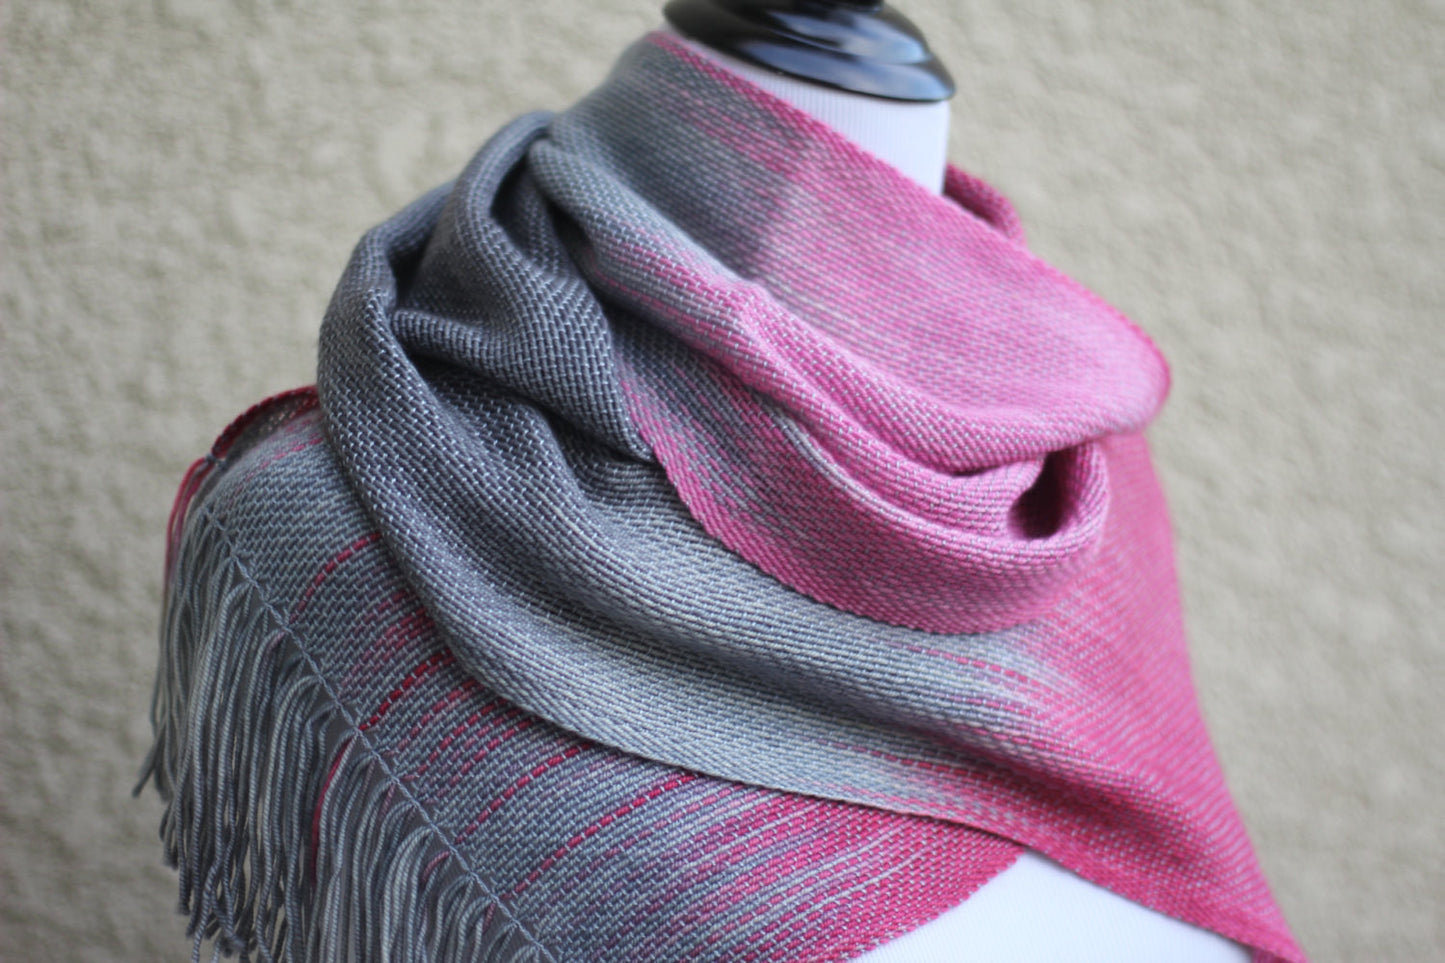 Woven pink and grey wrap